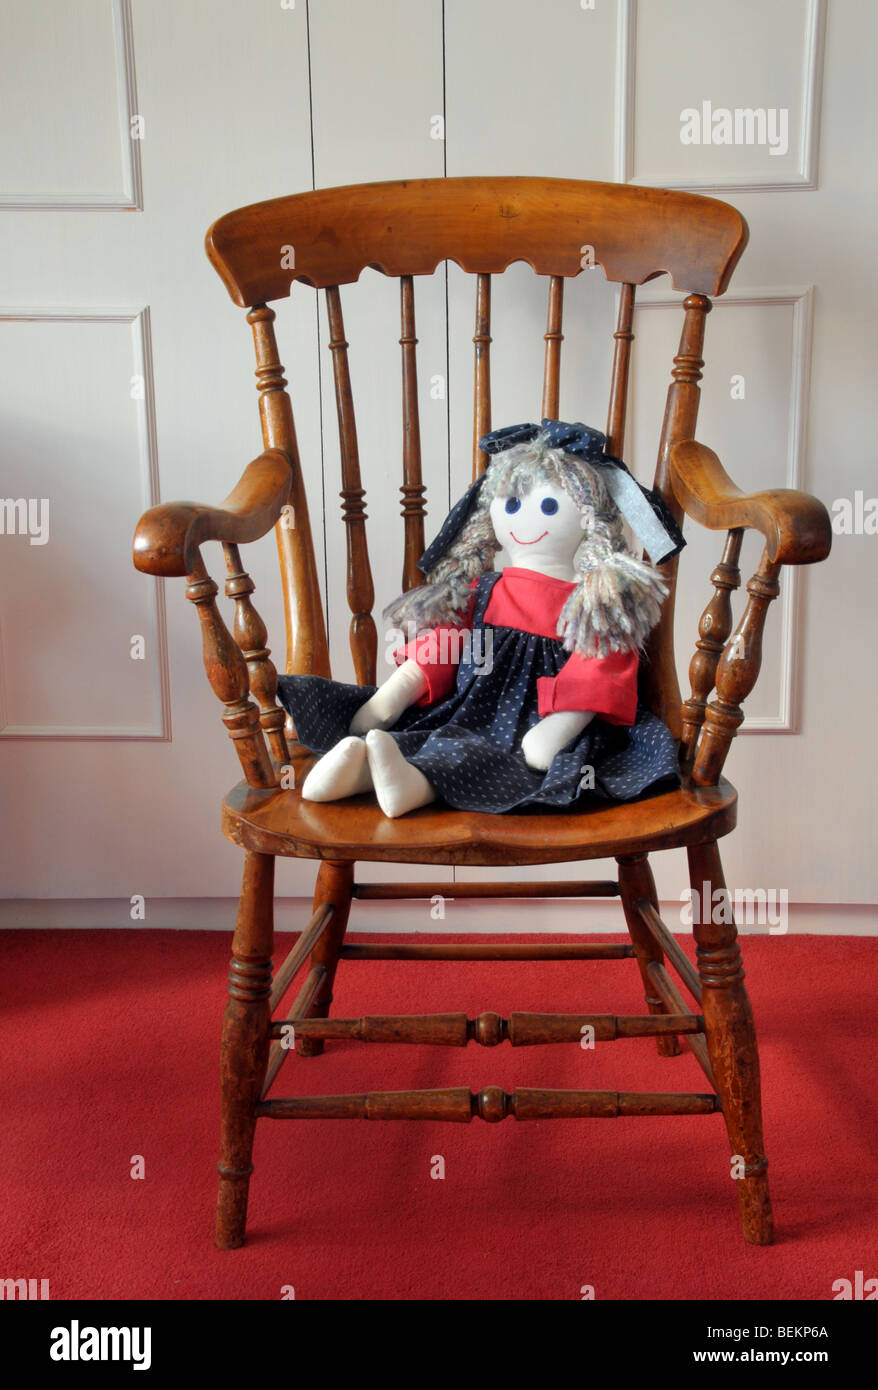 A home made cloth doll dressed in a blue and red pinafore  with a bow in her hair, sits on a wooden chair. Stock Photo